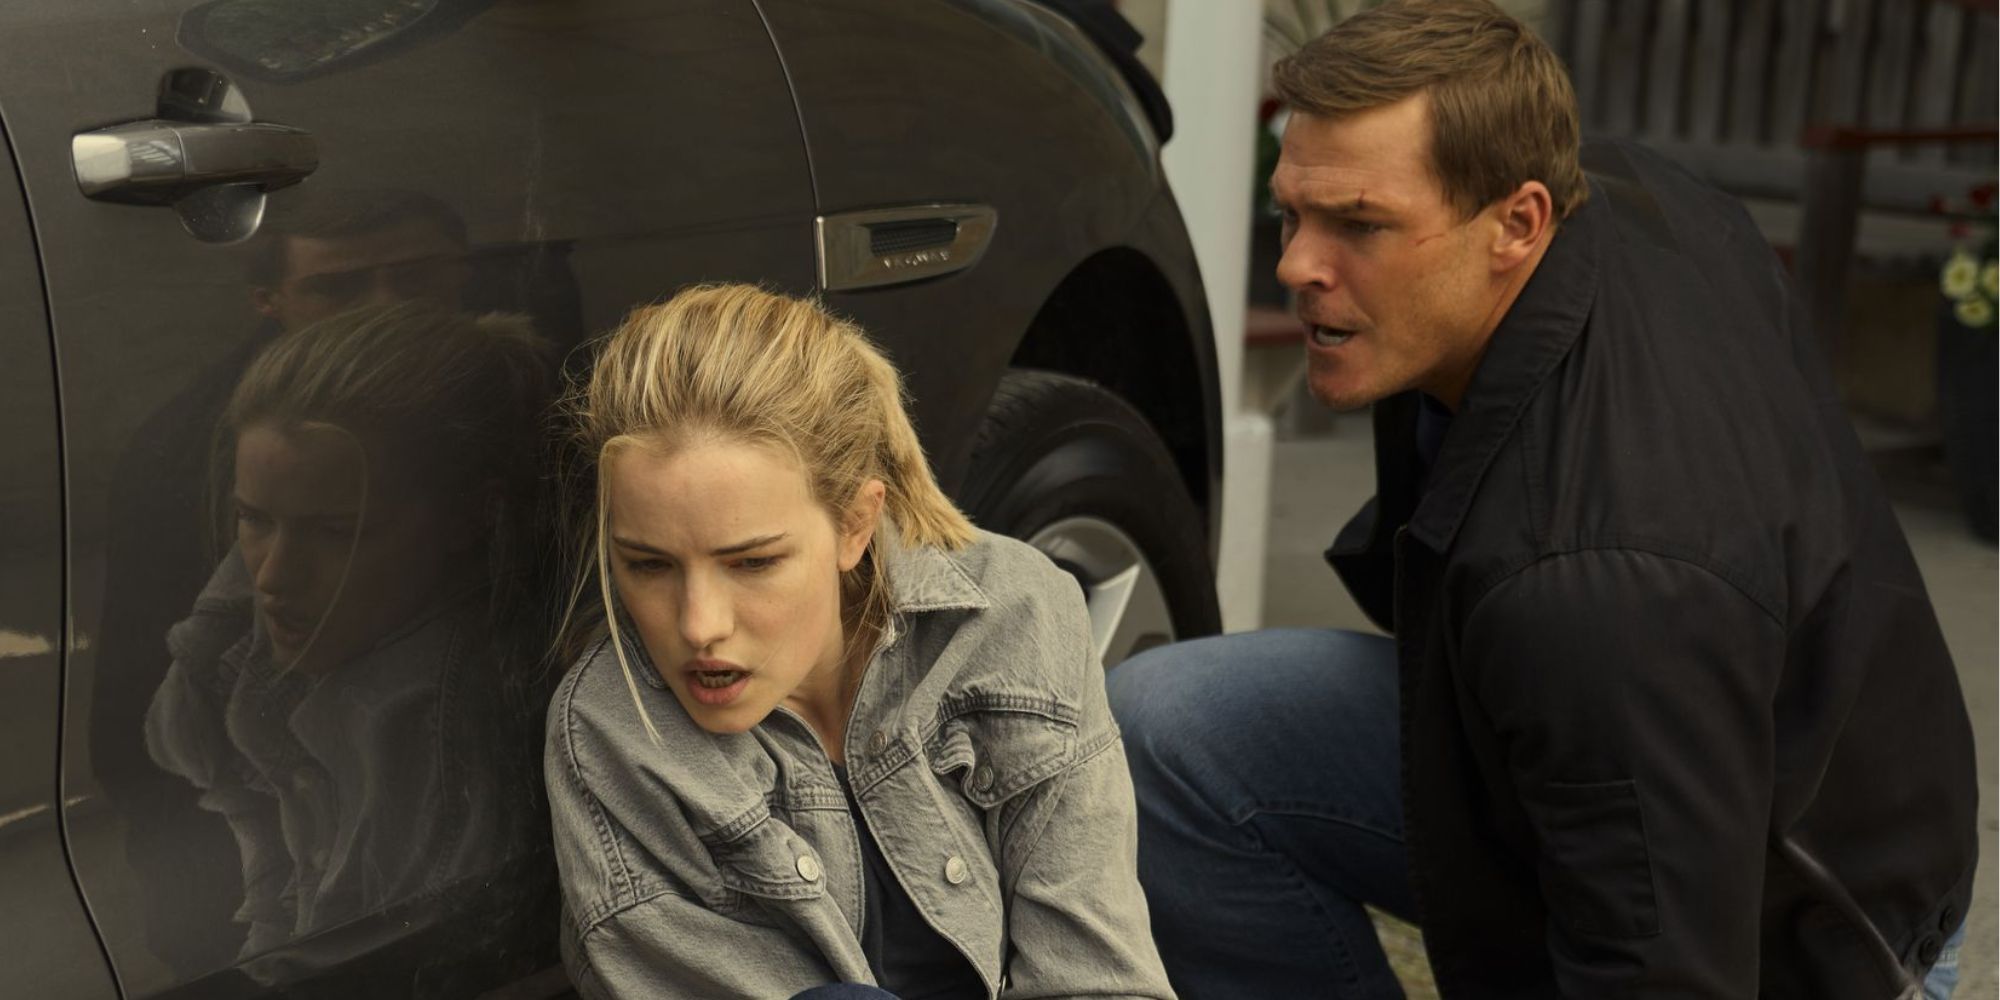 Willa Fitzgerald as Roscoe Conklin hiding behind a car with Alan Ritchson's Jack Reacher.